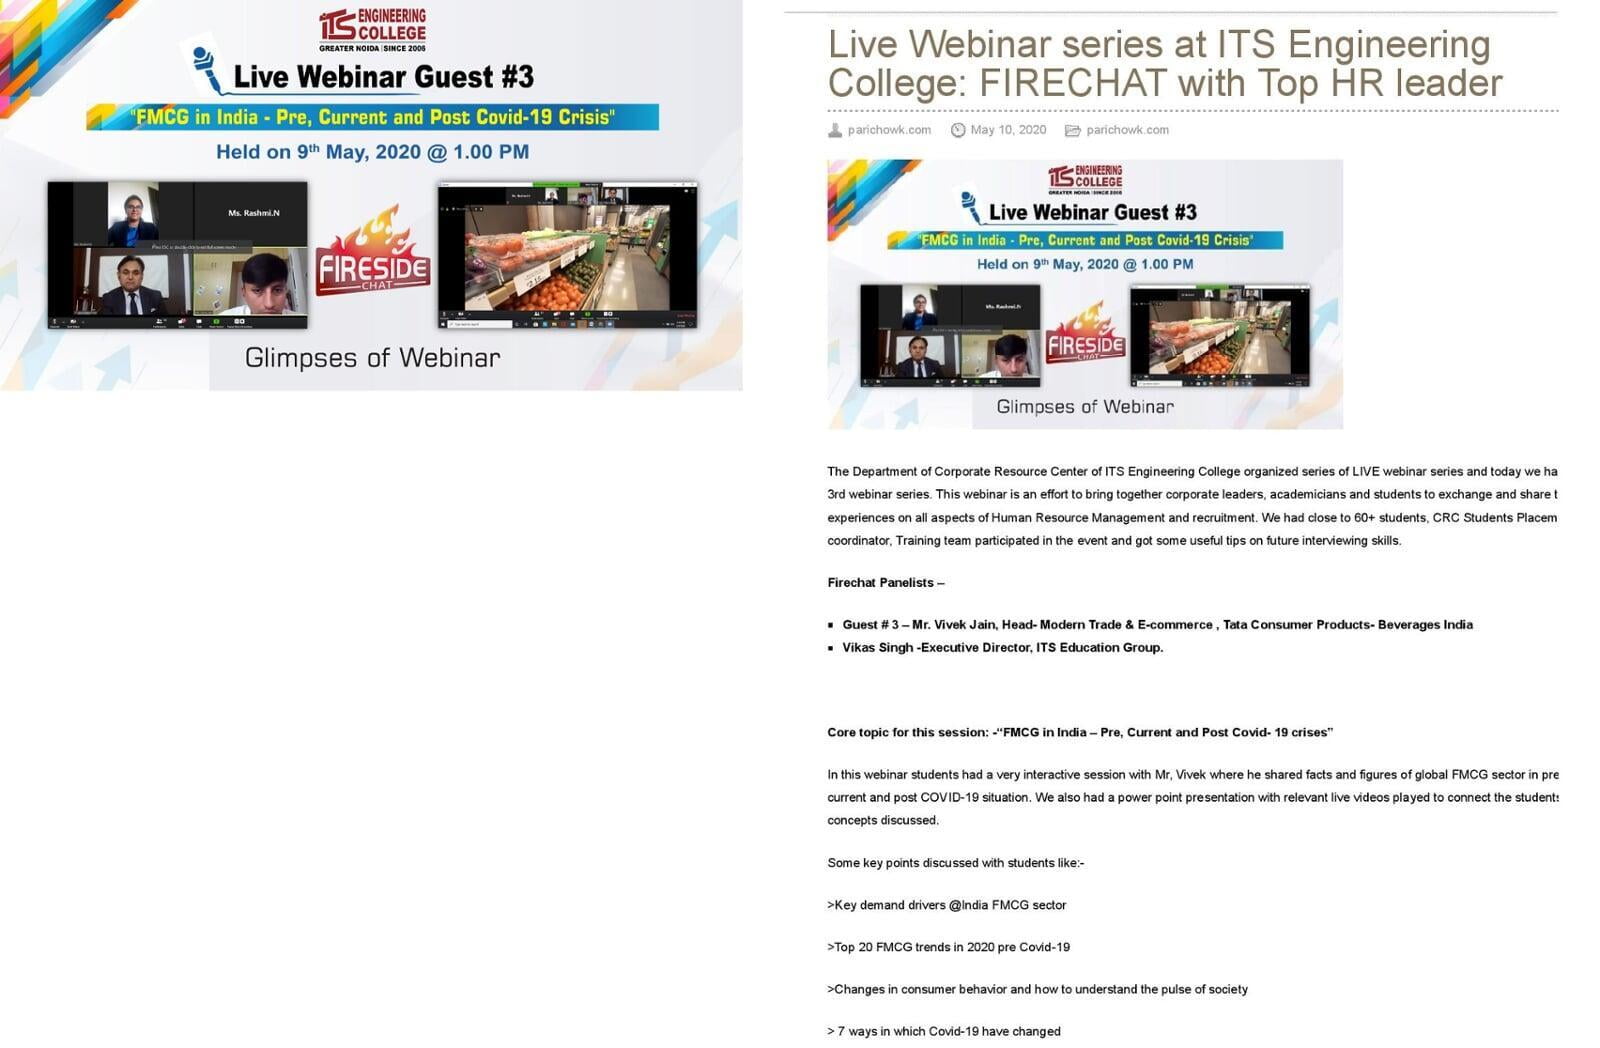 Live Webinar series at ITS Engineering College: FIRECHAT with top HR leader